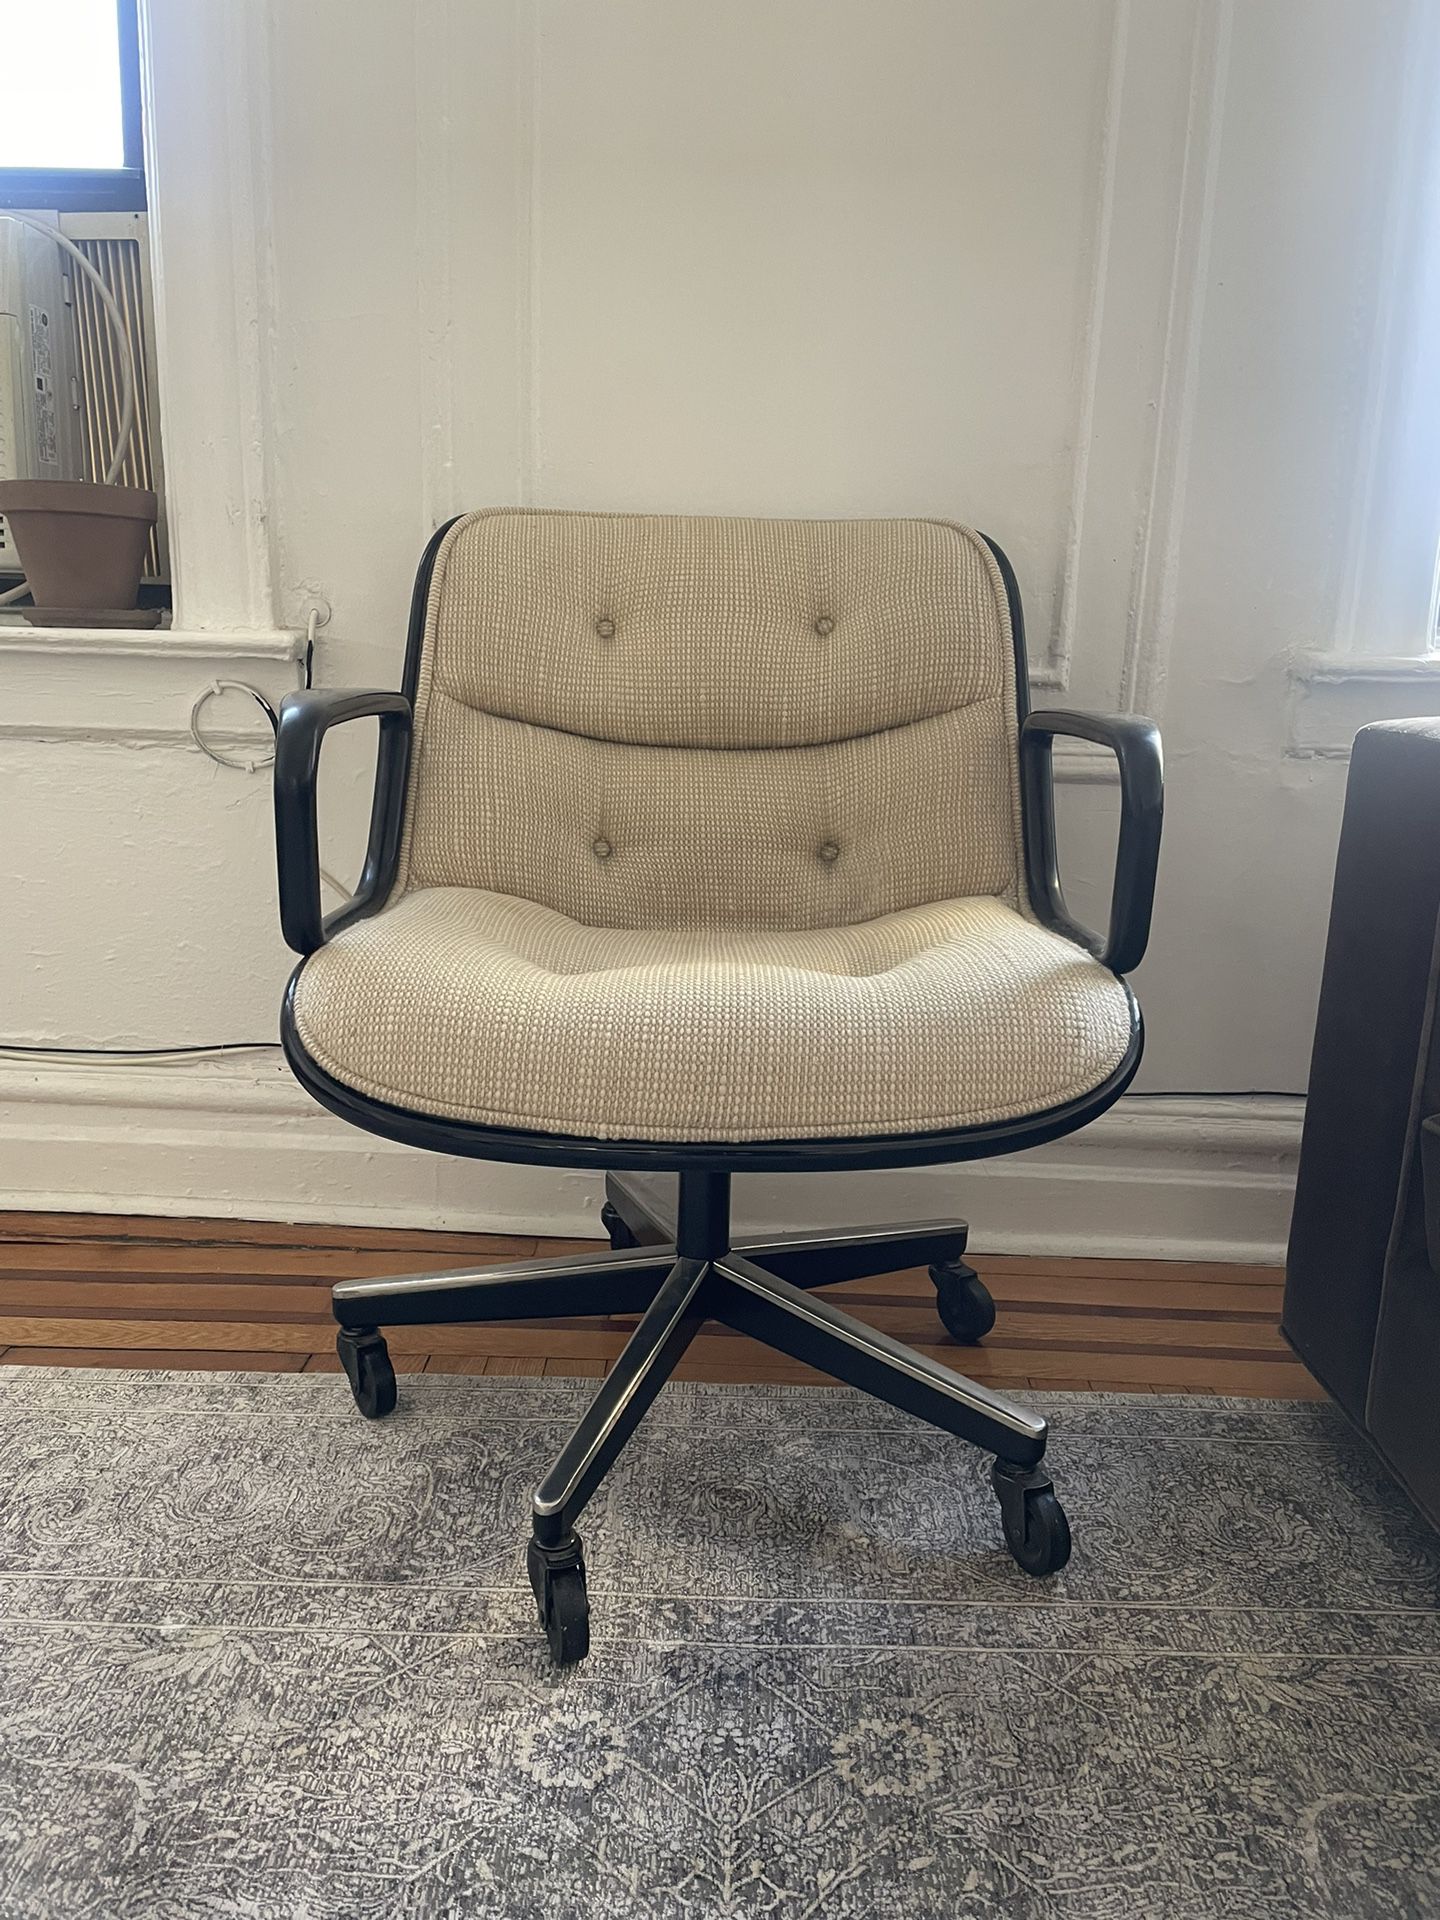 Vintage '88 Charles Pollack Executive Chair For Knoll